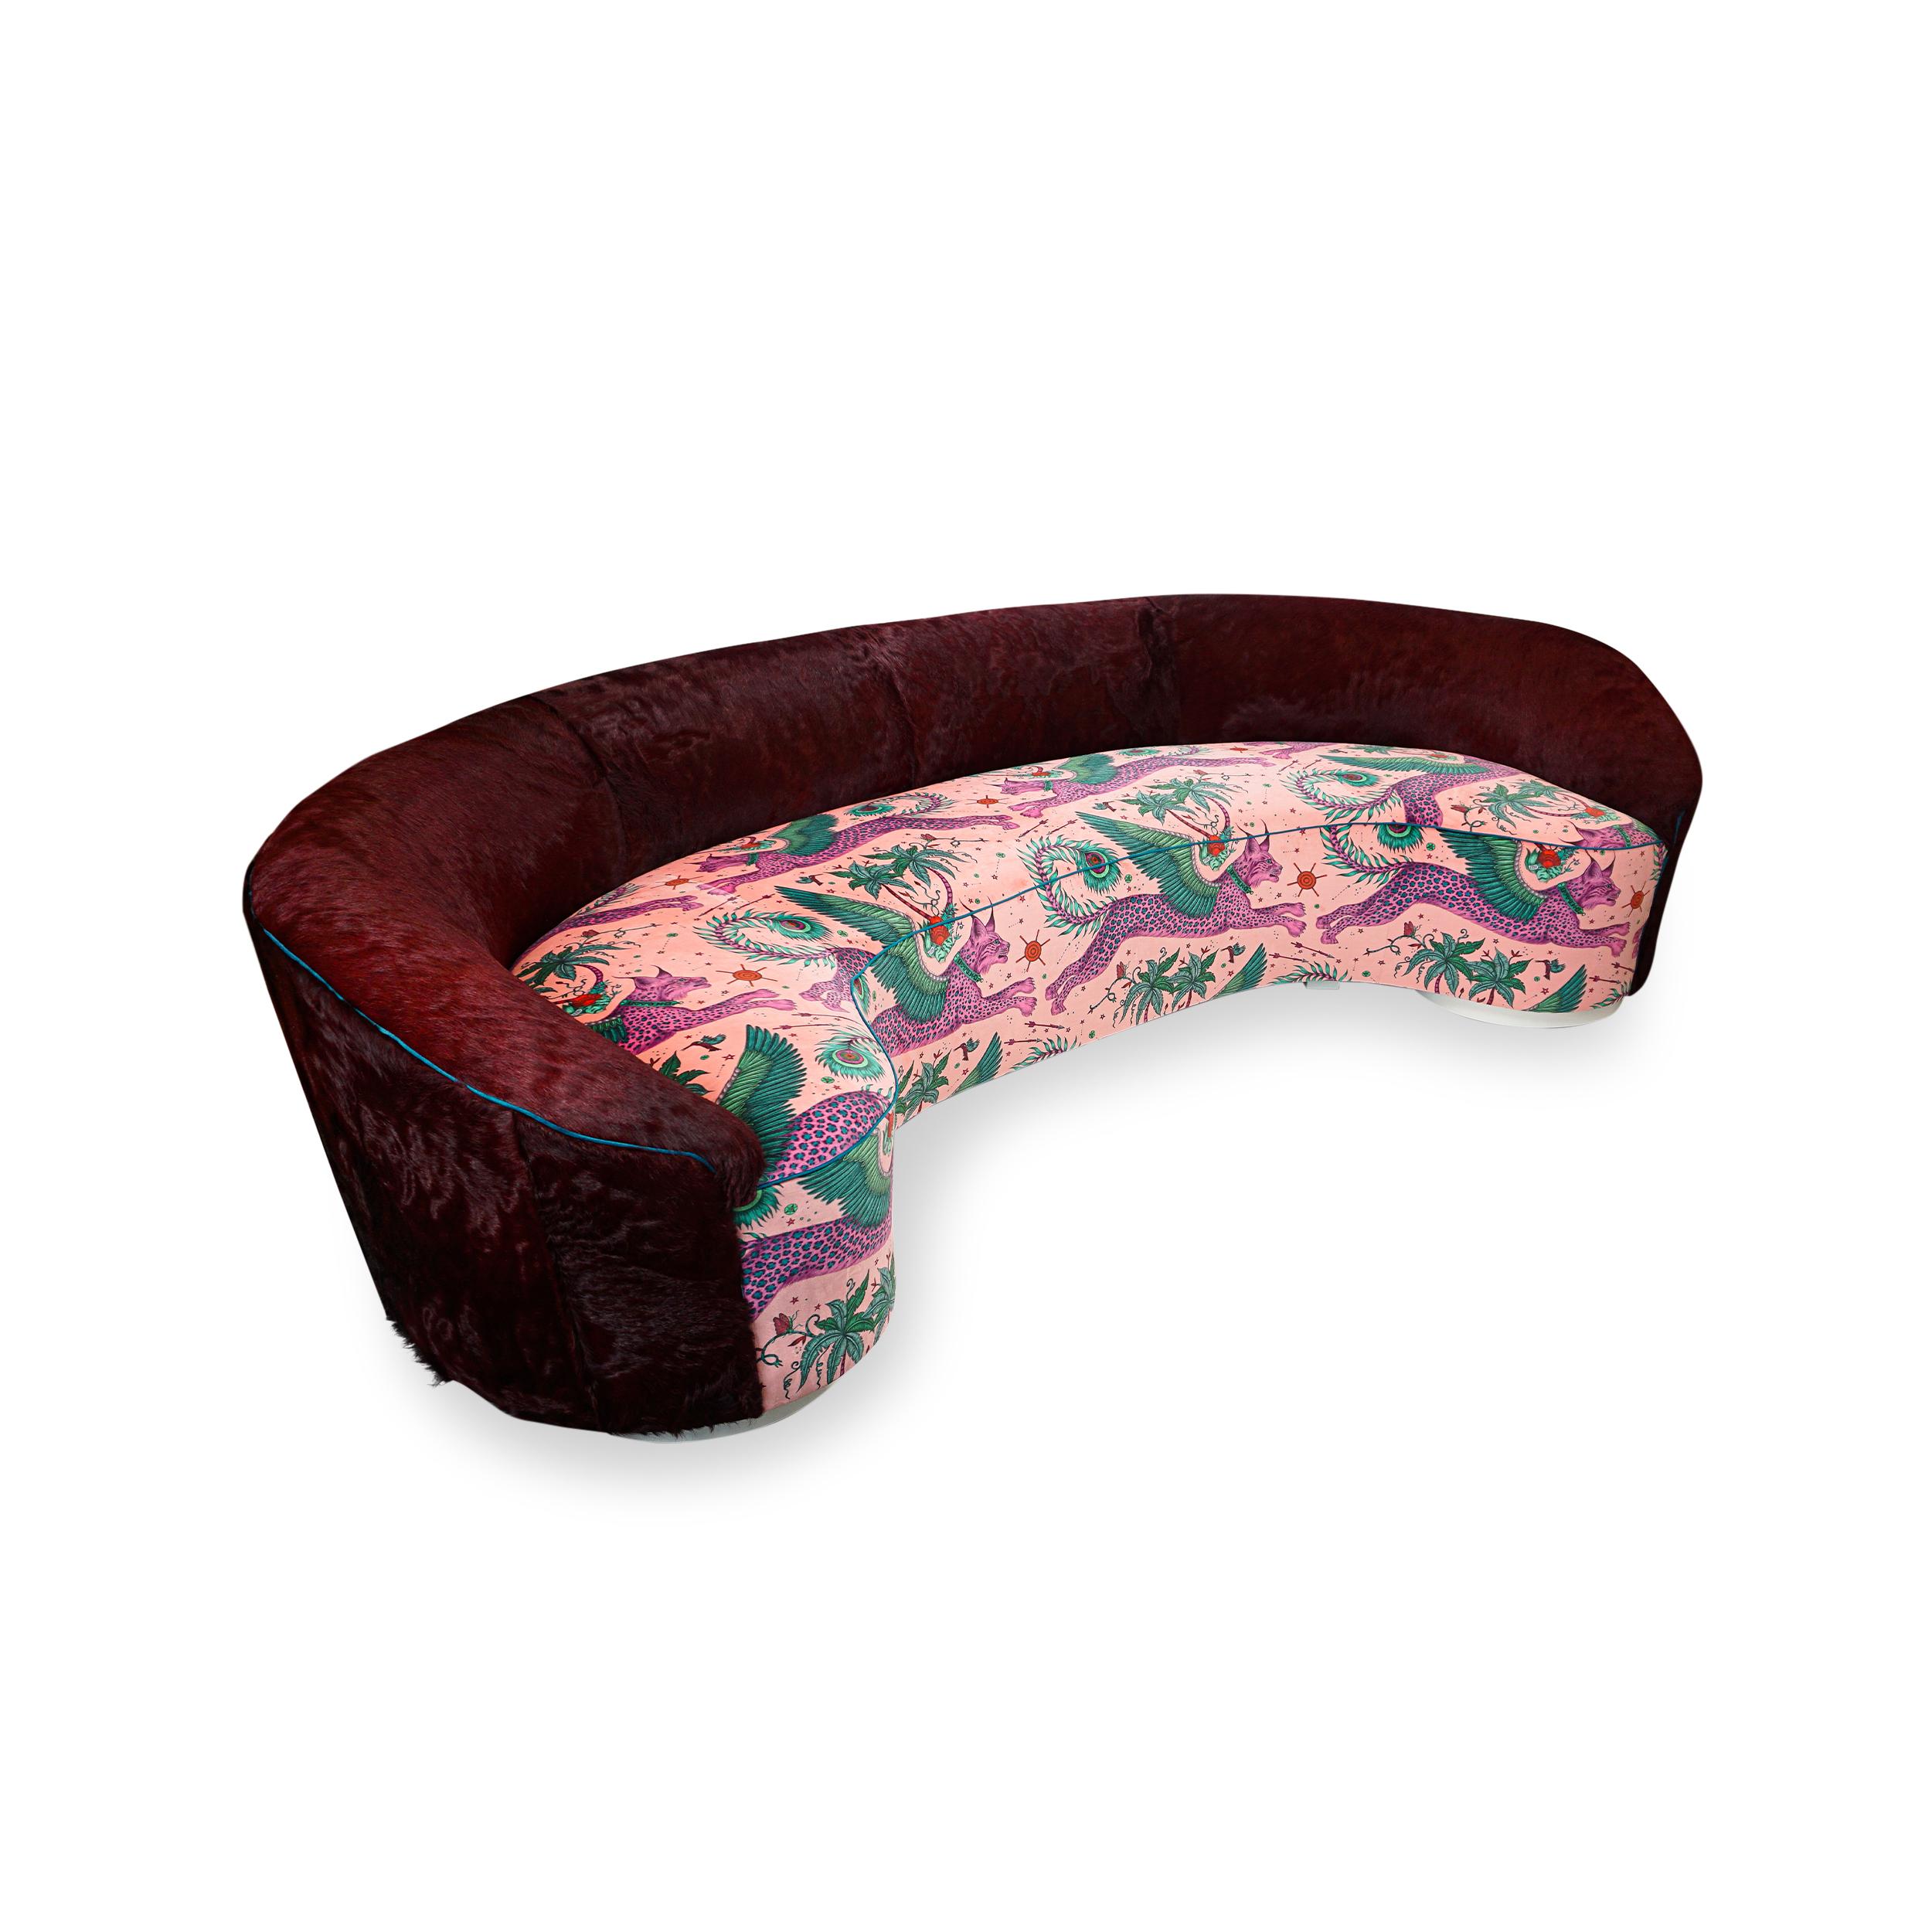 Curved, symmetrical sofa with slop arms upholstered with oxblood color hair on hide on back and fantastical printed velvet on seat with contrast welting. Grotesque and outrageous, exceptional and beautiful in one piece. Frame is hard maple and